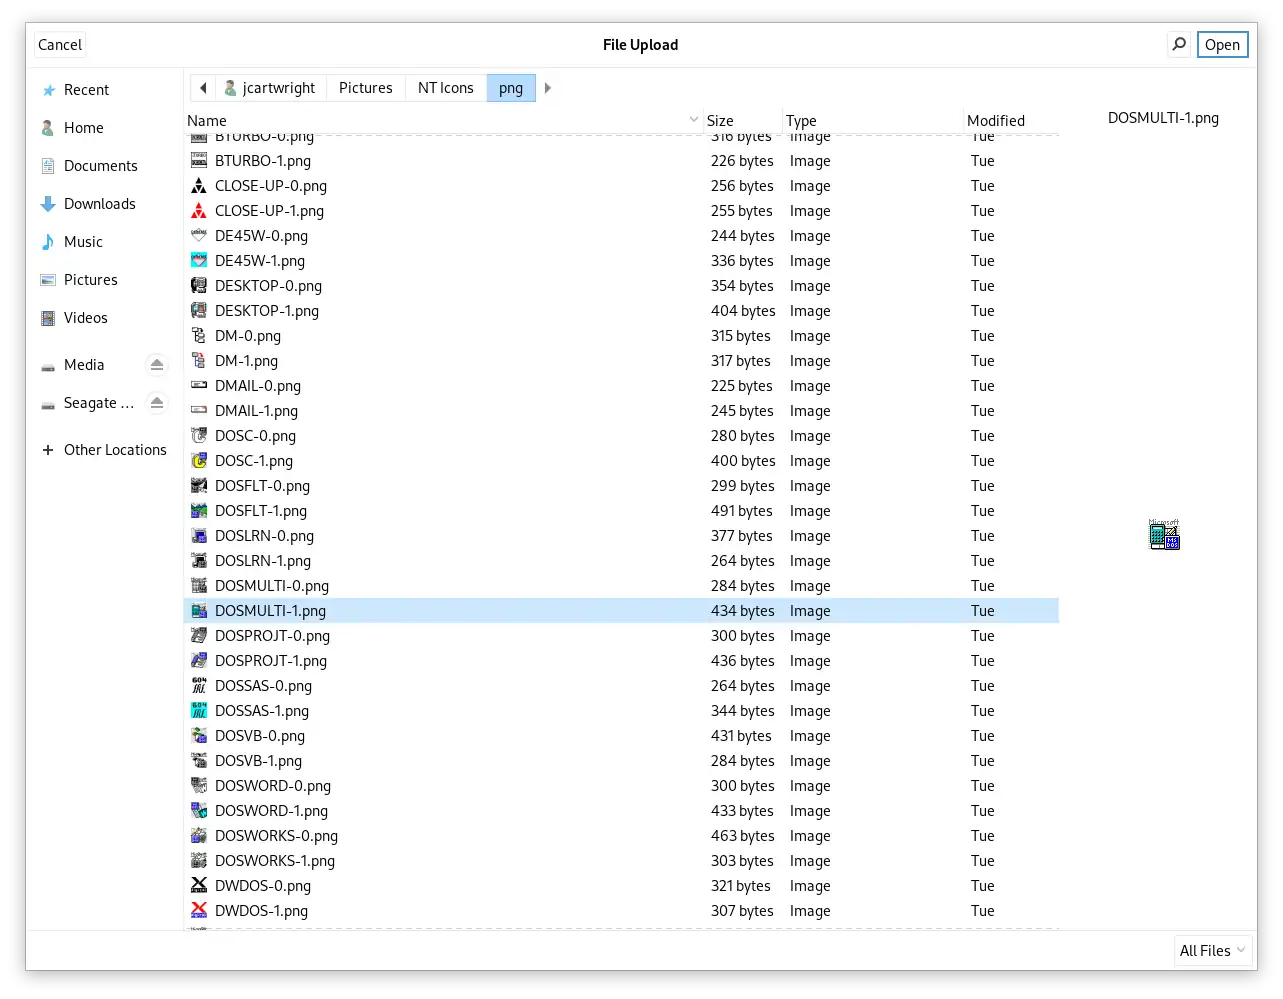 Gnome file picker in 2023. Still no large thumbnail view.